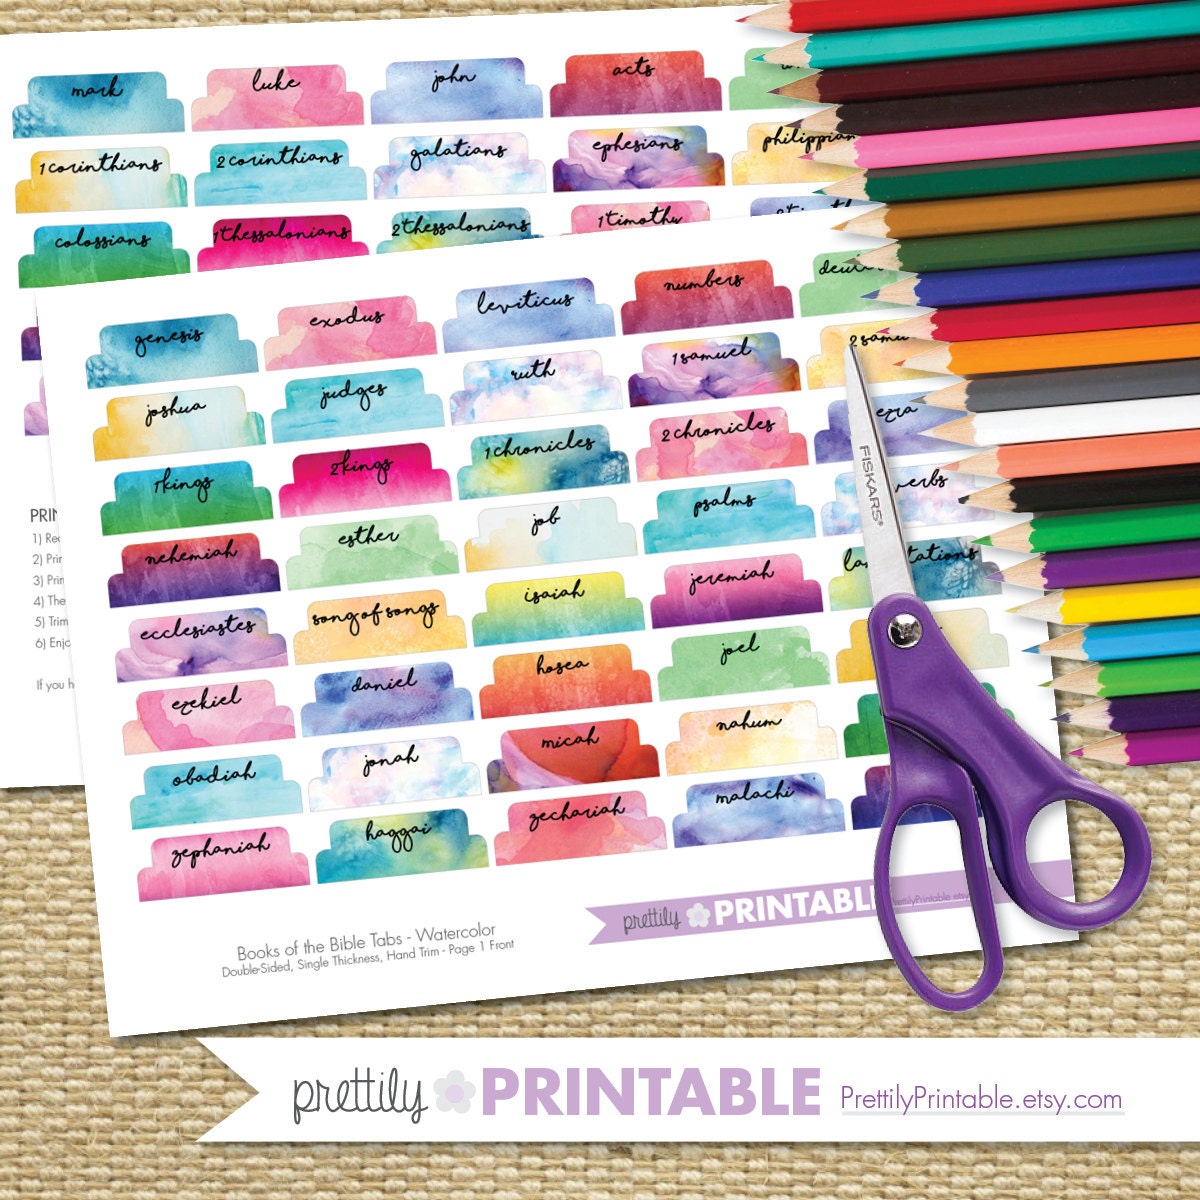 Printable Books of the Bible Tabs Watercolor for Hand